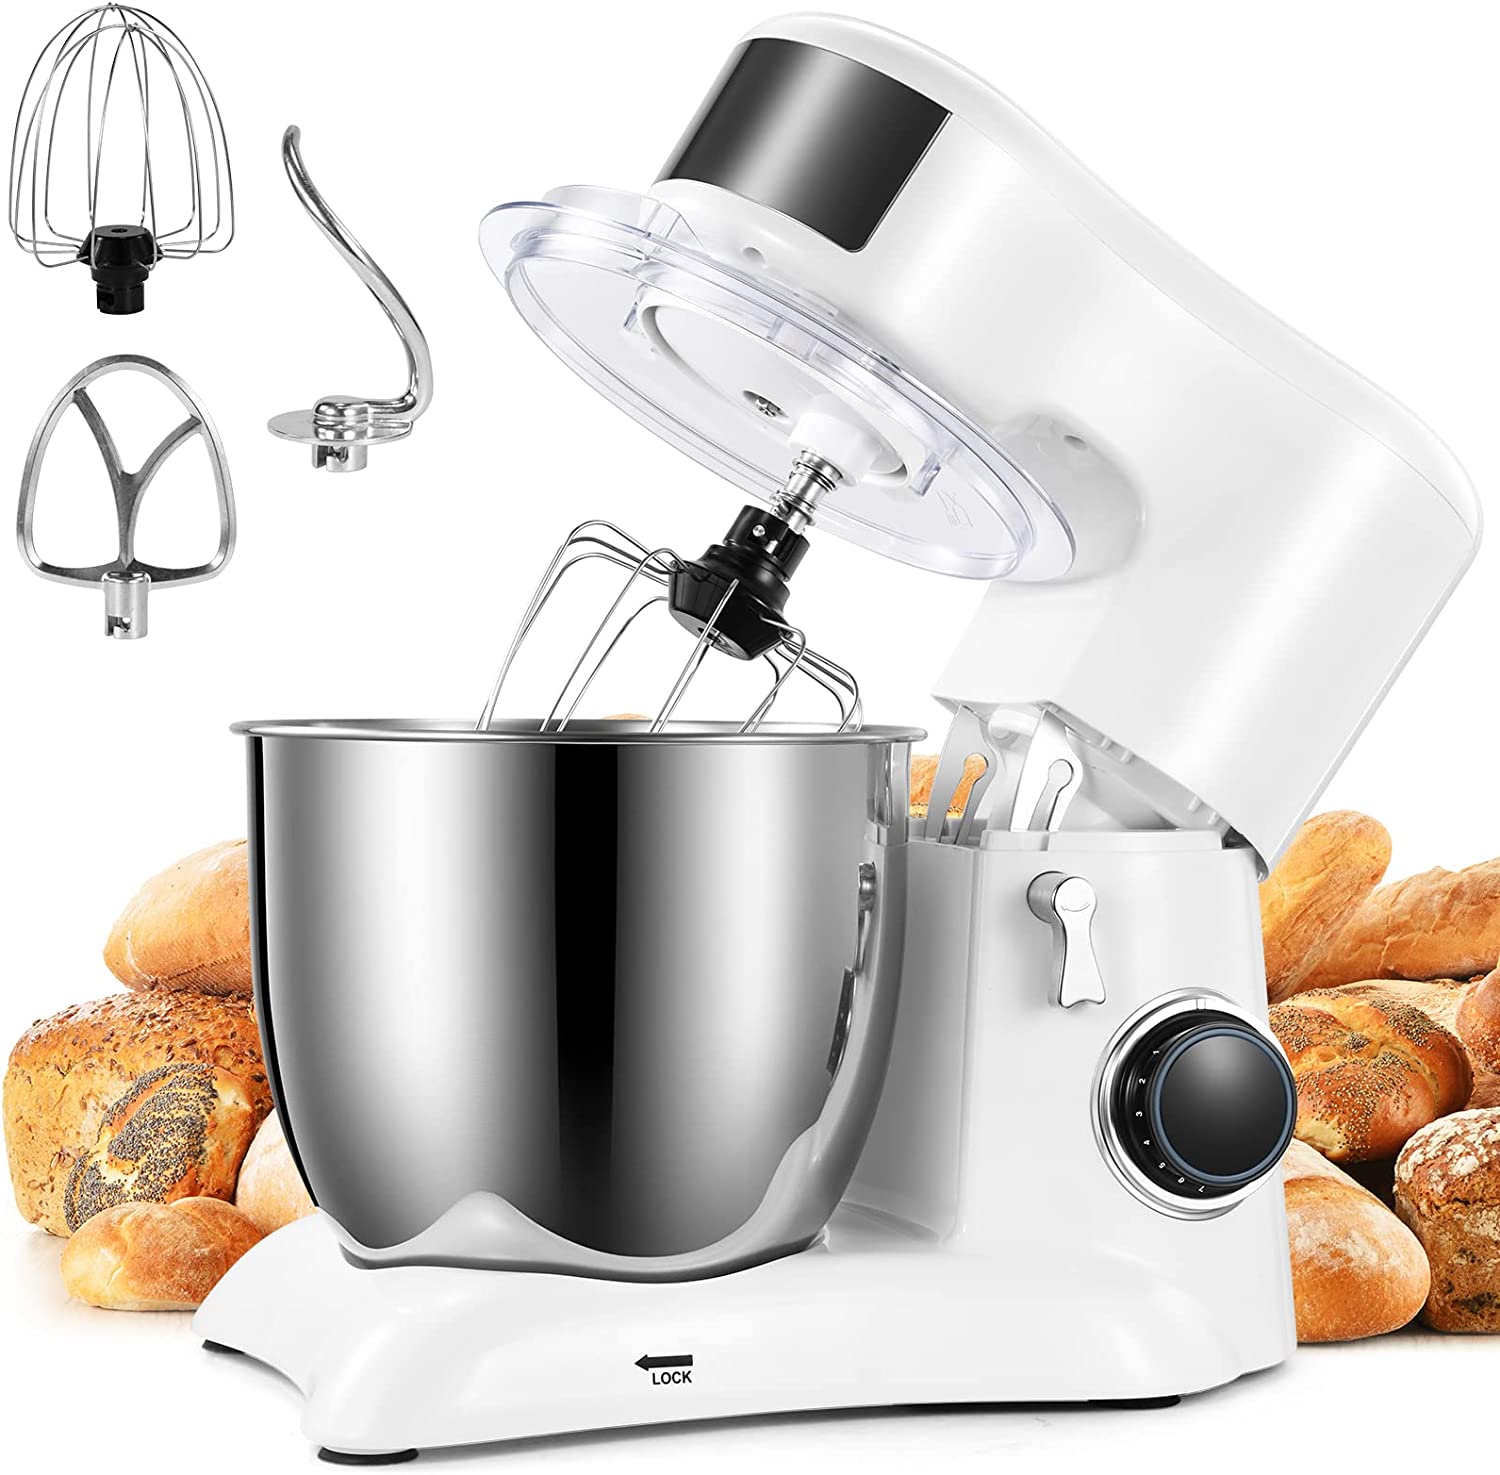 CCN FOOD Processor Kneading Machine, 1300 W Kneading Machine with Dough Hook, Dough Machine 10 Speed ​​With 5.5 Litre Bowl Made of Stainless Steel, Whisk, Whisk, Mixing Bowl, All-Metal Transmission System